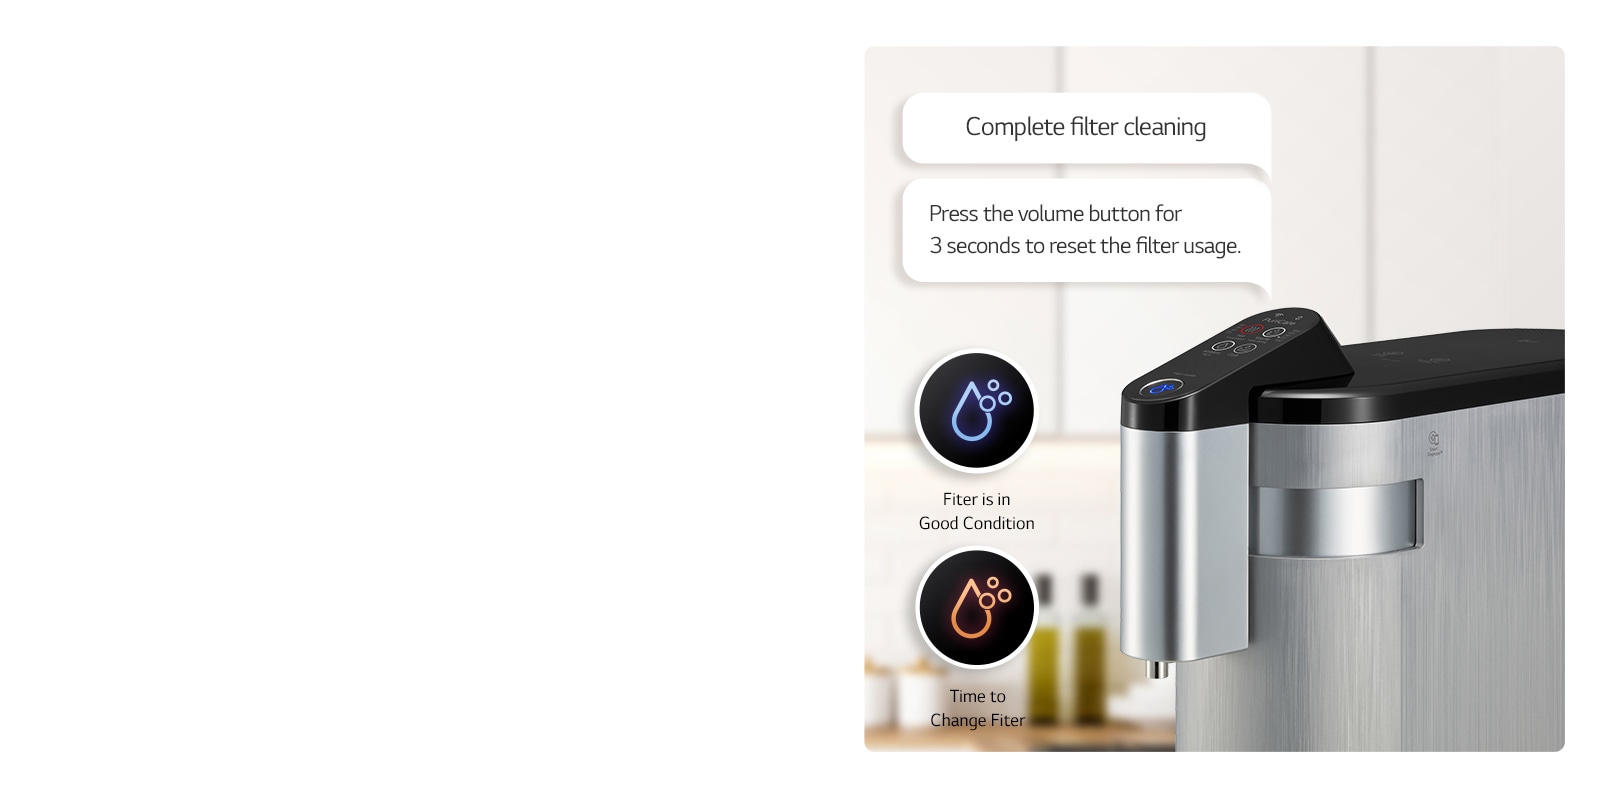 There is a water purifier in what is seen as a kitchen, blue and red icon on the left, and a speech bubble